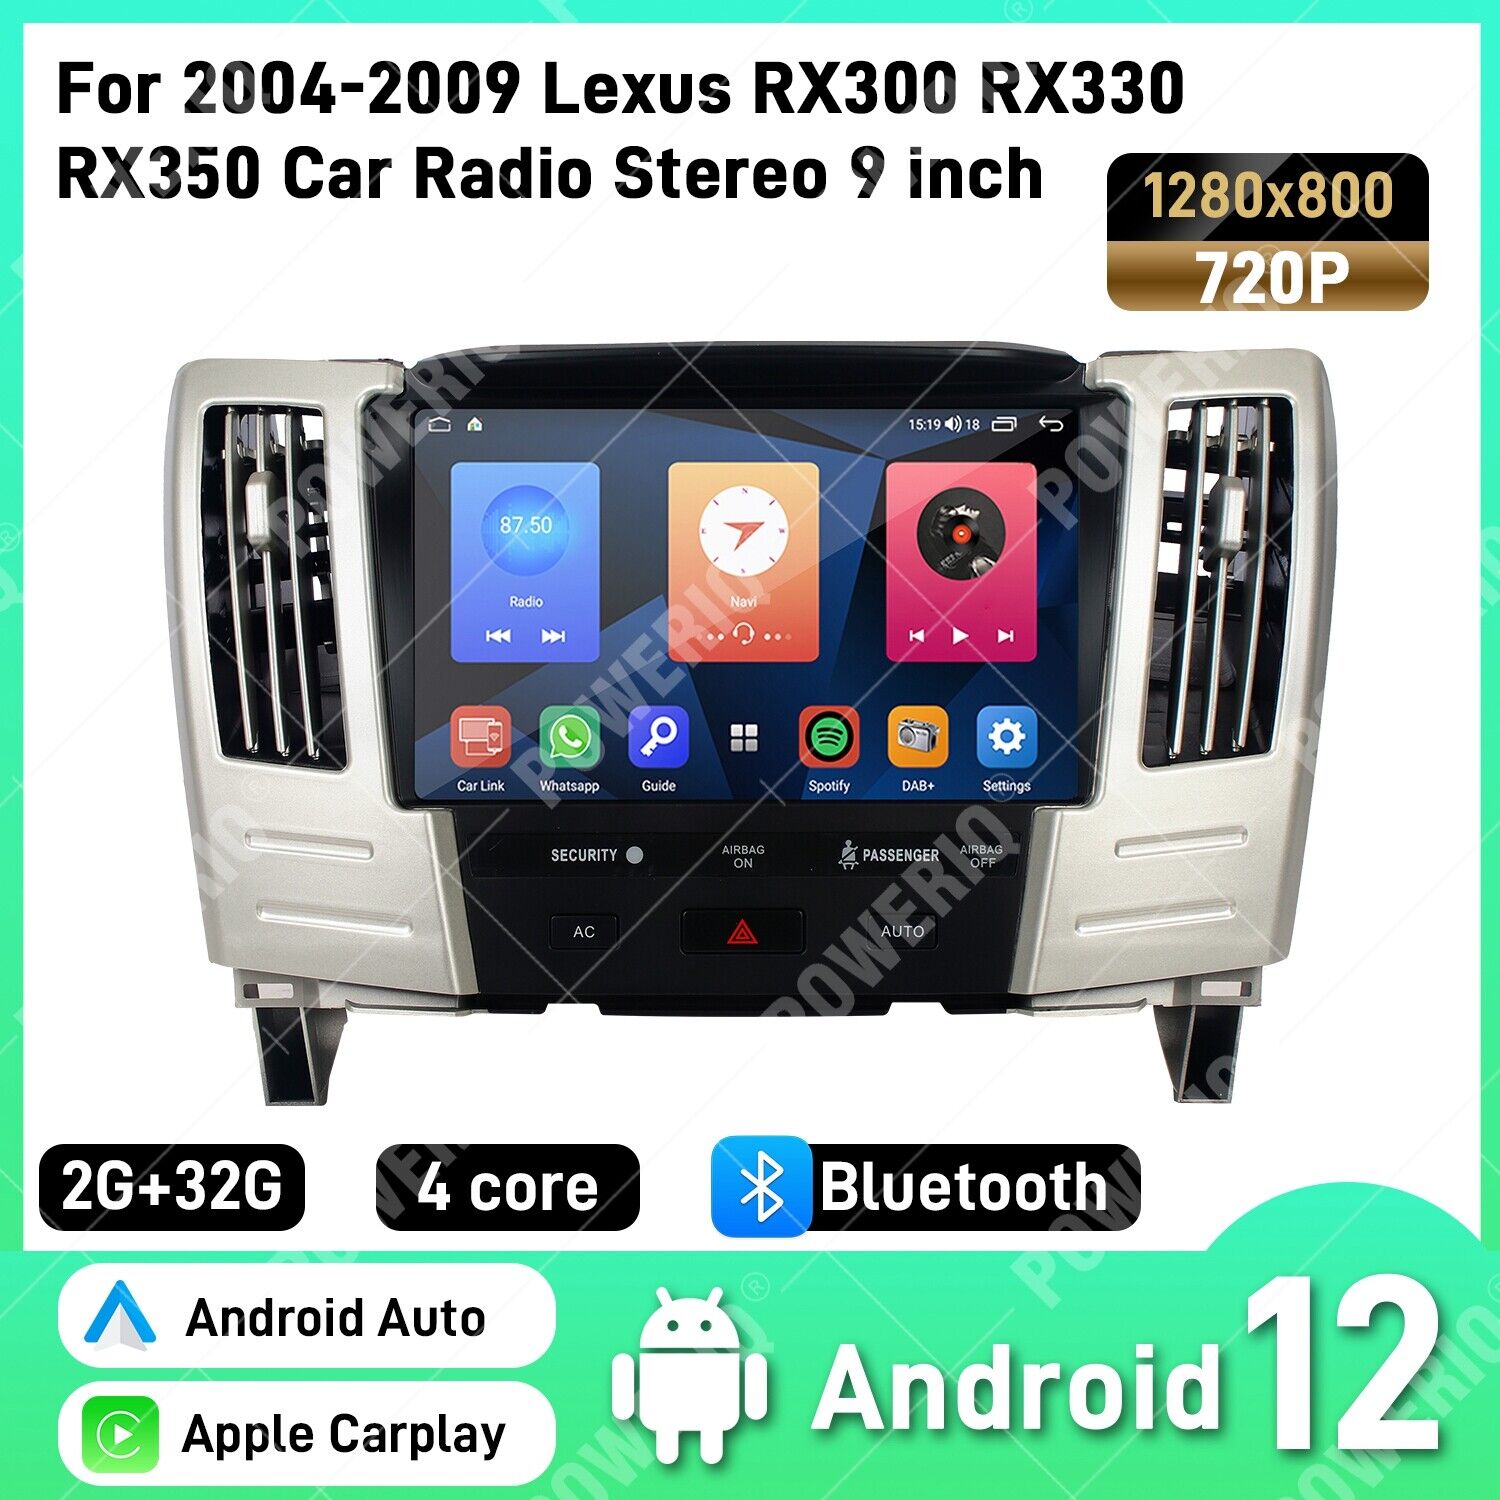 For Lexus RX300 RX330 RX350 2004-09 Car Radio Stereo Android 12 Apple CarPlay/US